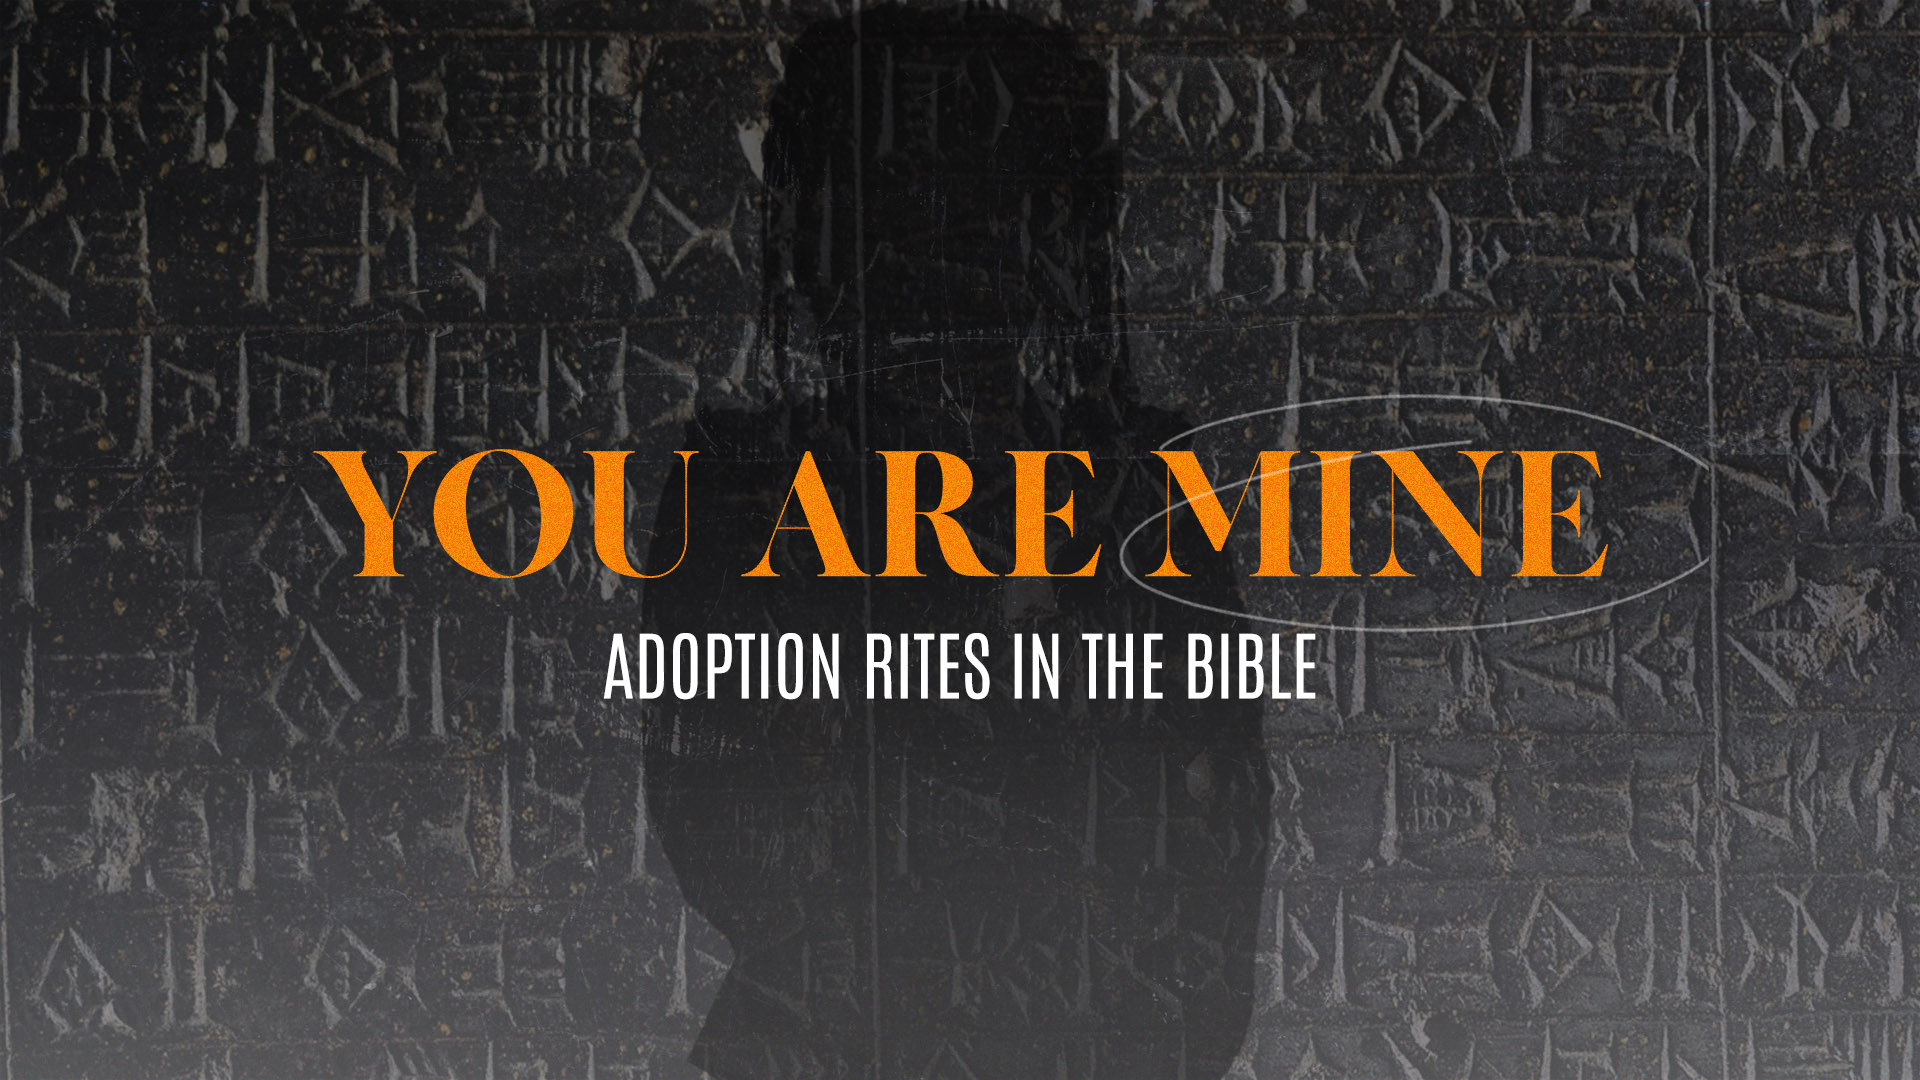 ancient adoption ceremony teaching on November 26th at Founded in Truth Fellowship in Rock Hill